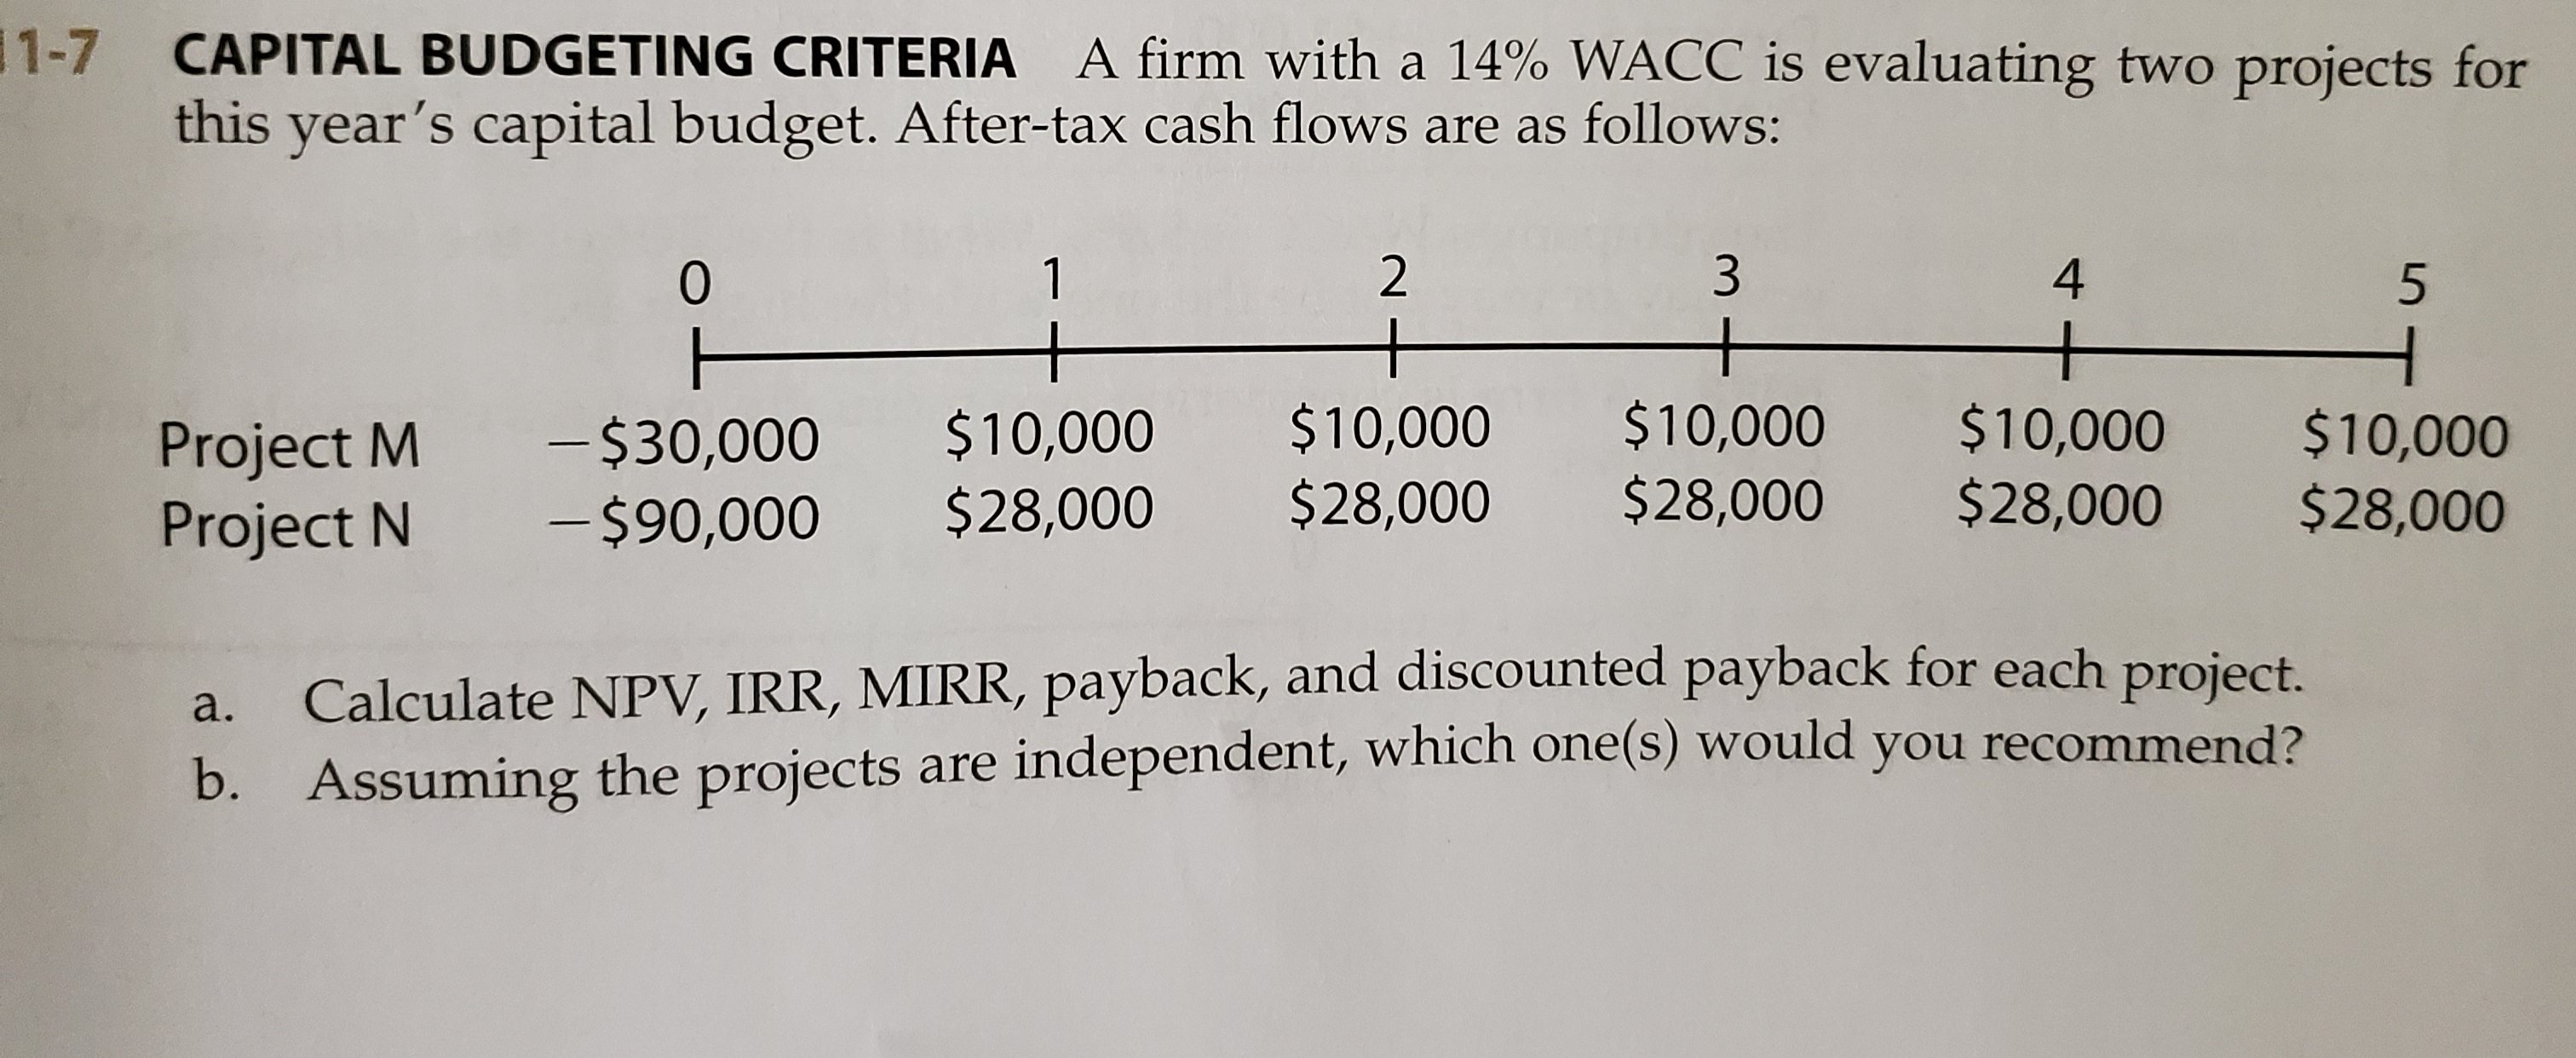 CAPITAL BUDGETING CRITERIA A firm with a 14% WACC is evaluating two projects for
this year's capital budget. After-tax cash flows are as follows:
1
2
4
Project M
Project N
- $30,000
%2490,000
$10,000
$28,000
+
$10,000
$28,000
+
$10,000
$28,000
+
$10,000
$28,000
$10,000
$28,000
|
-
Calculate NPV, IRR, MIRR, payback, and discounted payback for each project.
Orcuming the proiects are independent, which one(s) would you recommend?
a.
3.
